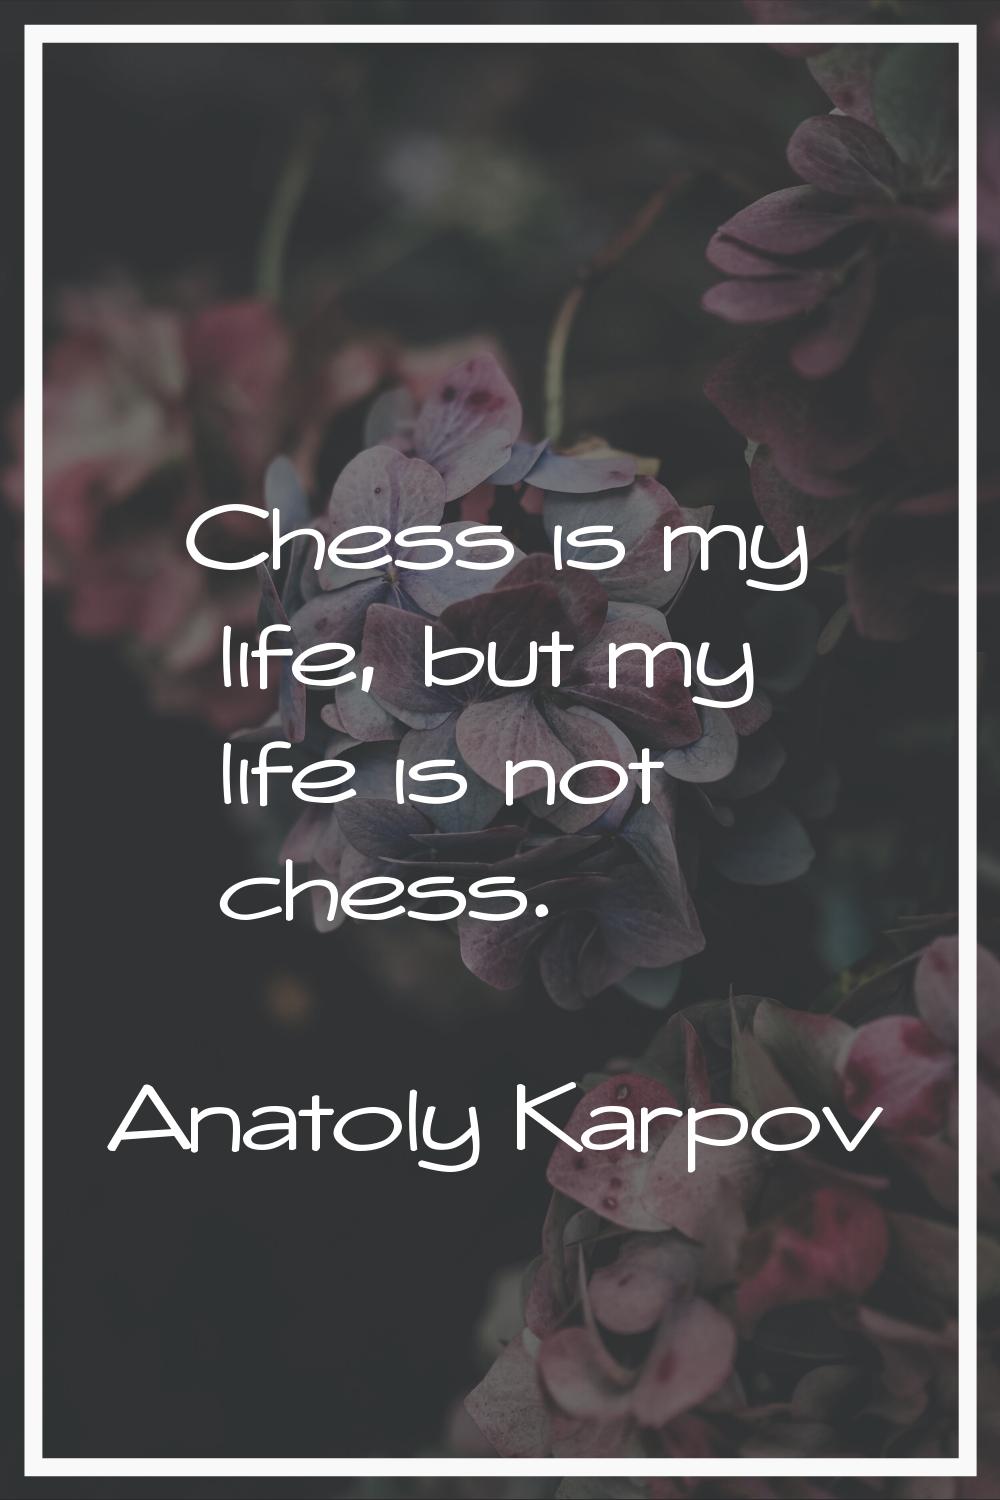 Chess is my life, but my life is not chess.